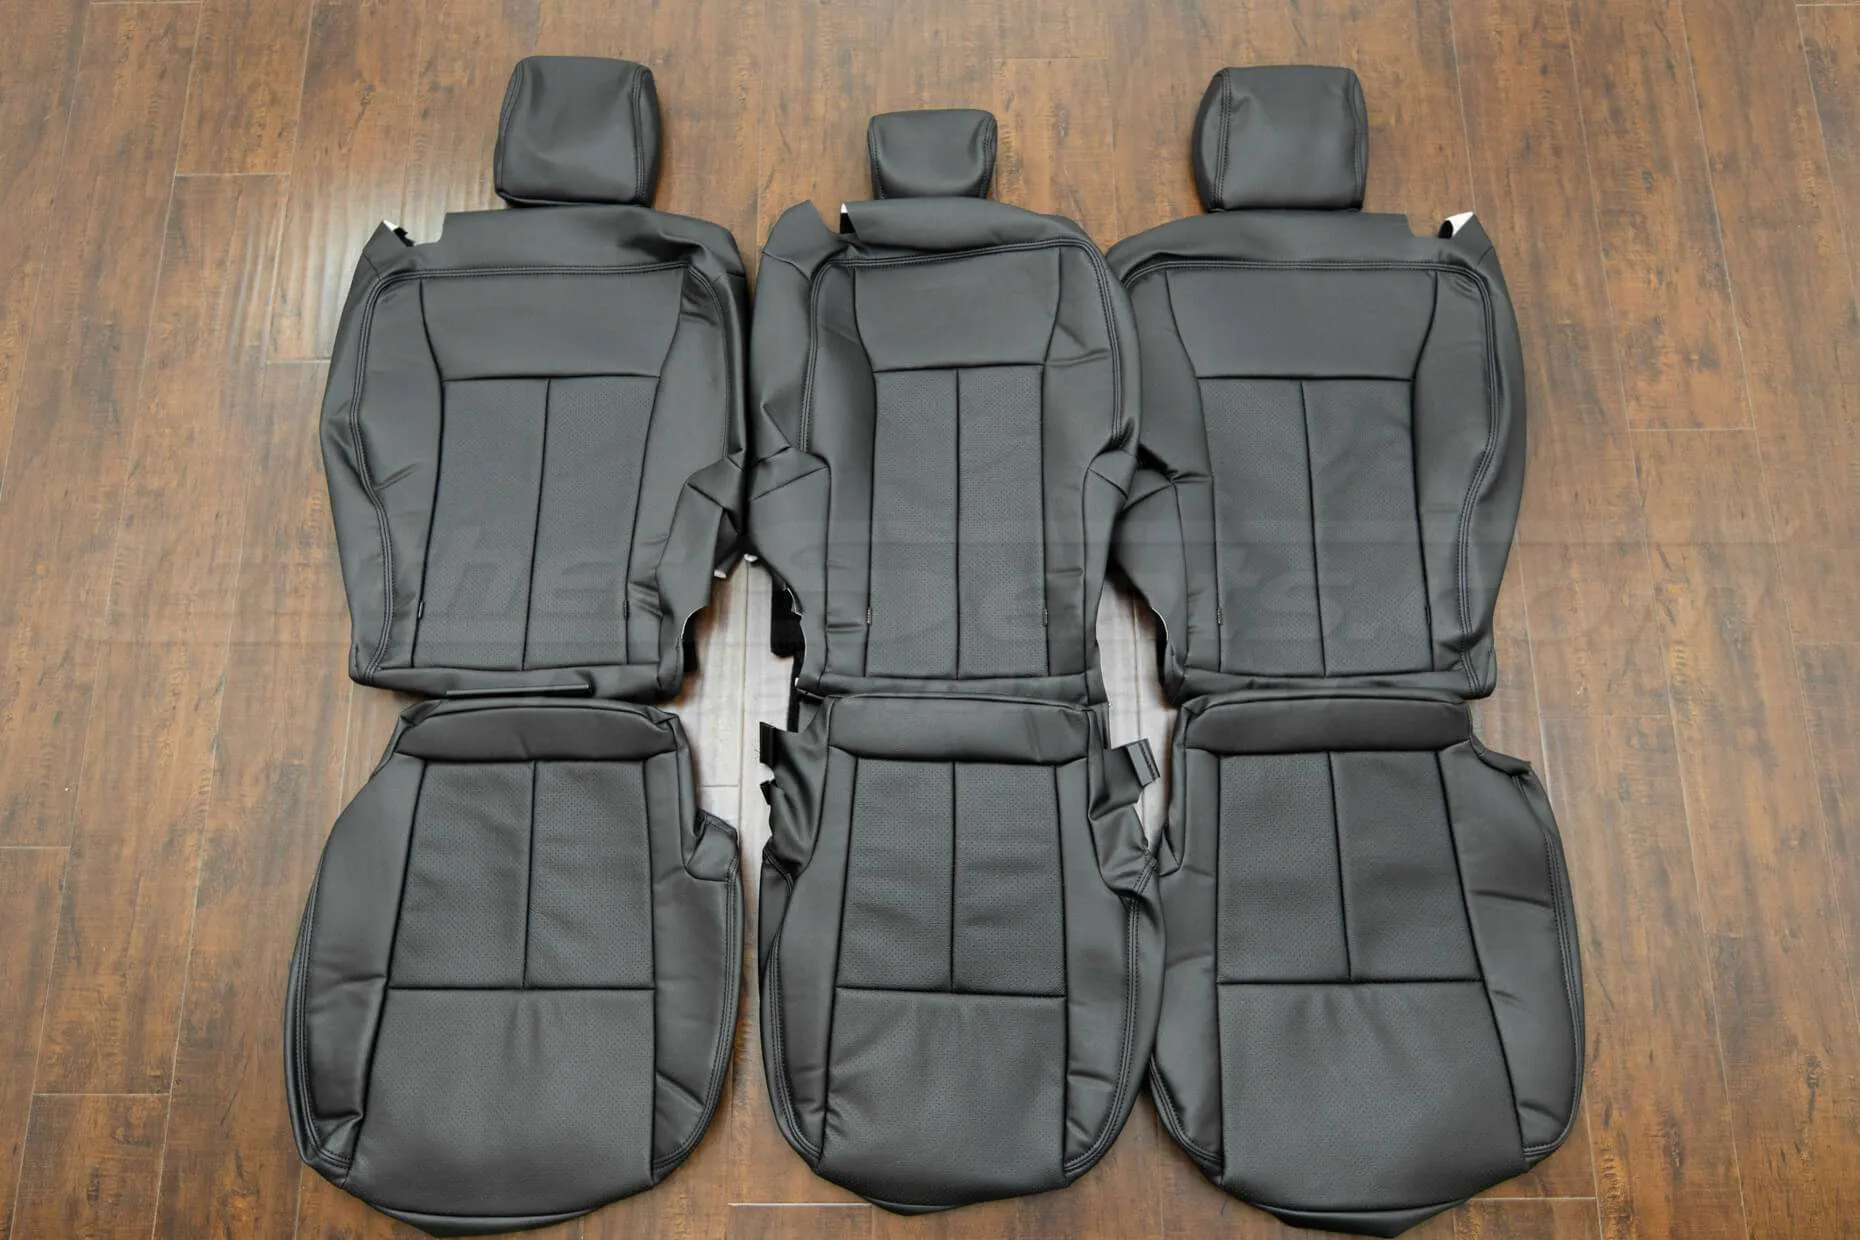 Ford Expedition Leather Upholstery Kit - Black - Rear seats